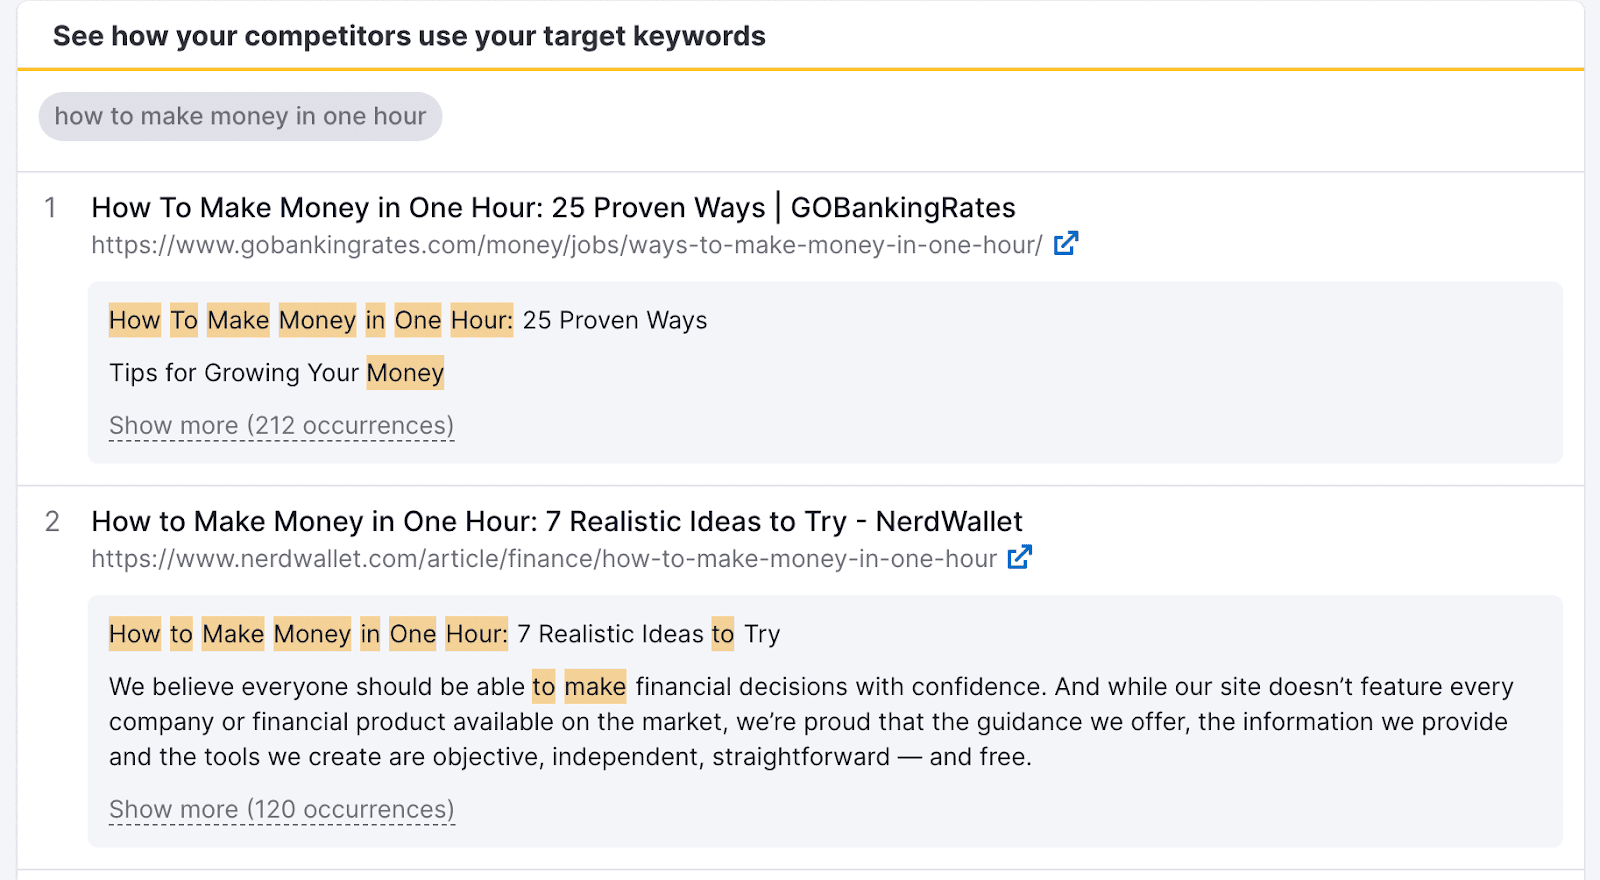 "See how your competitors use your target keywords" report section in SEO Content Template